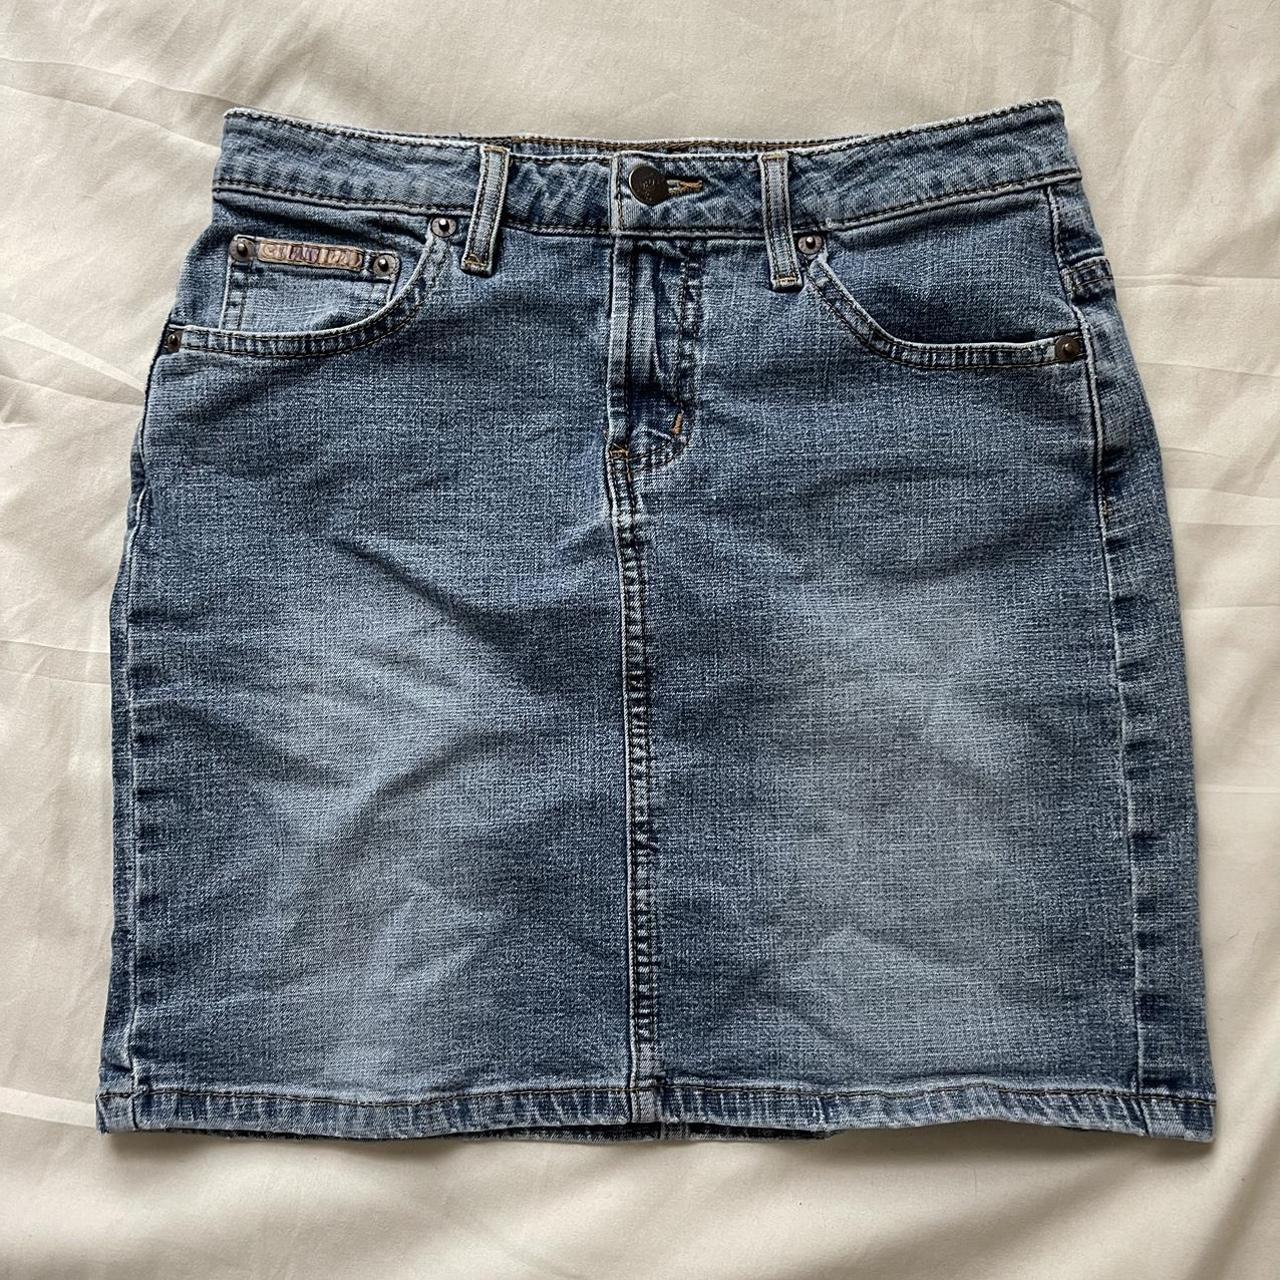 The most adorable y2k lei denim pencil skirt with a... - Depop